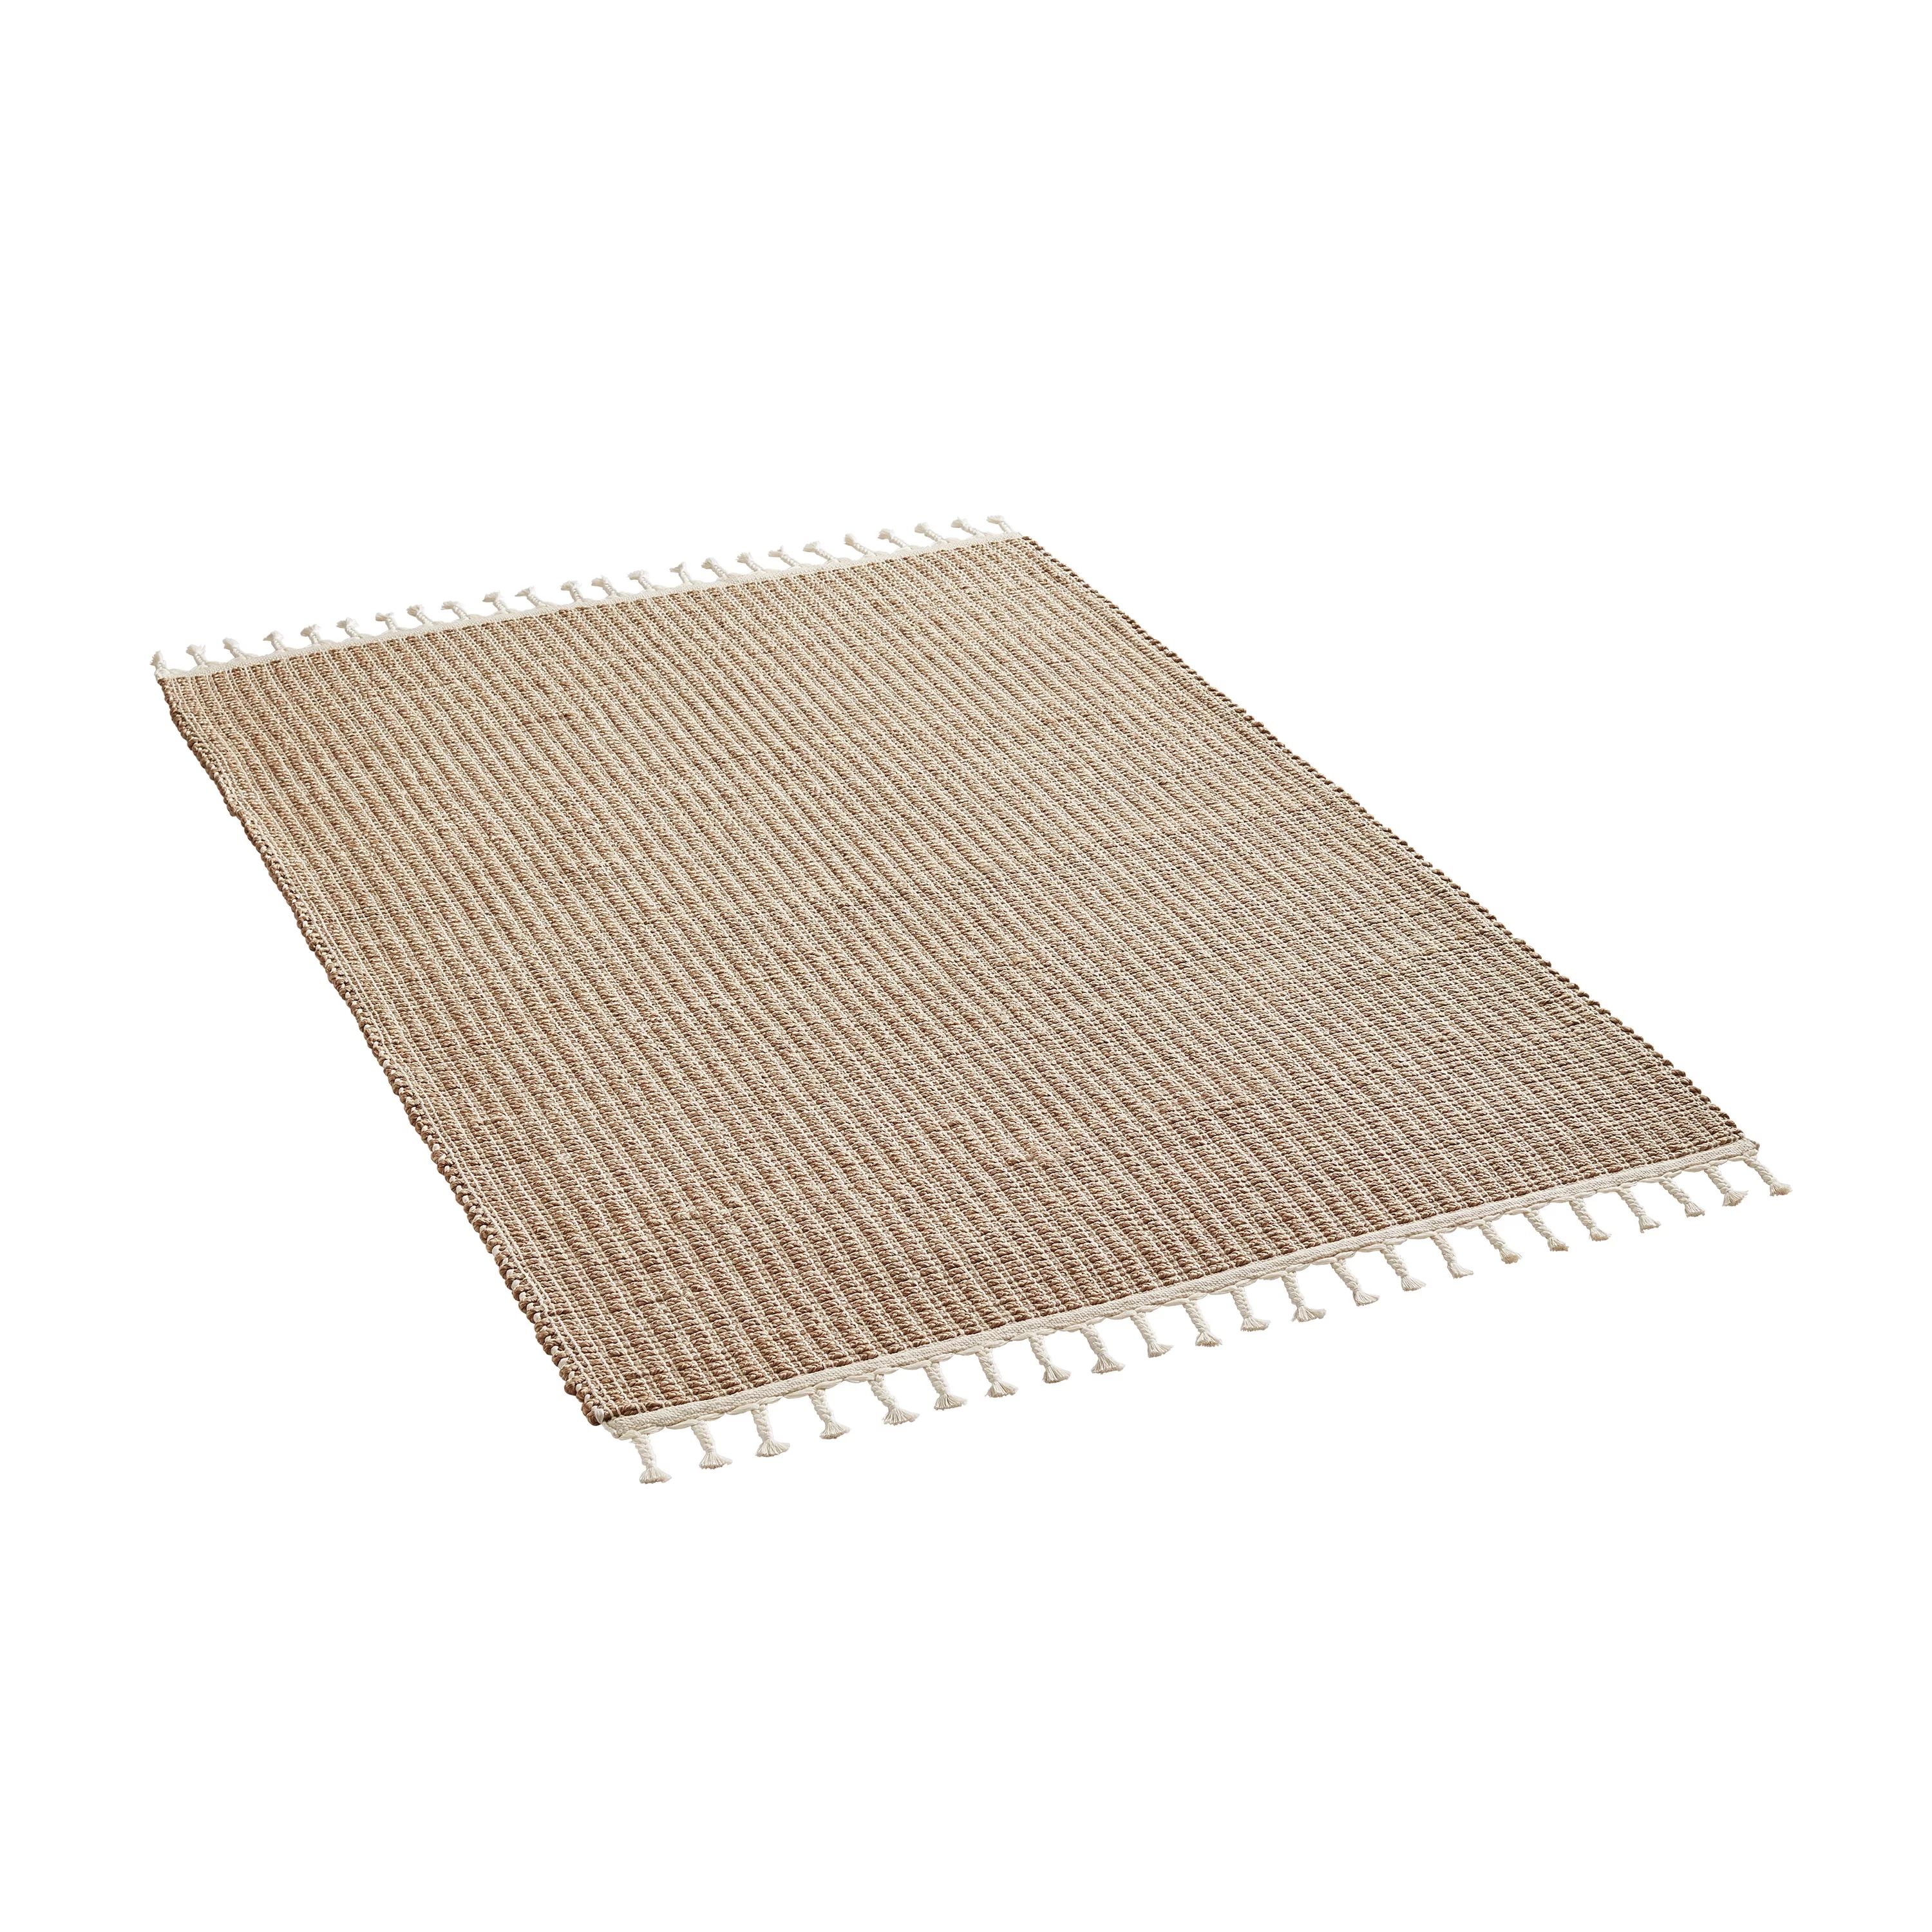 Better Homes & Gardens Ivory Natural Striped Rug by Dave & Jenny Marrs, 7x10 | Walmart (US)